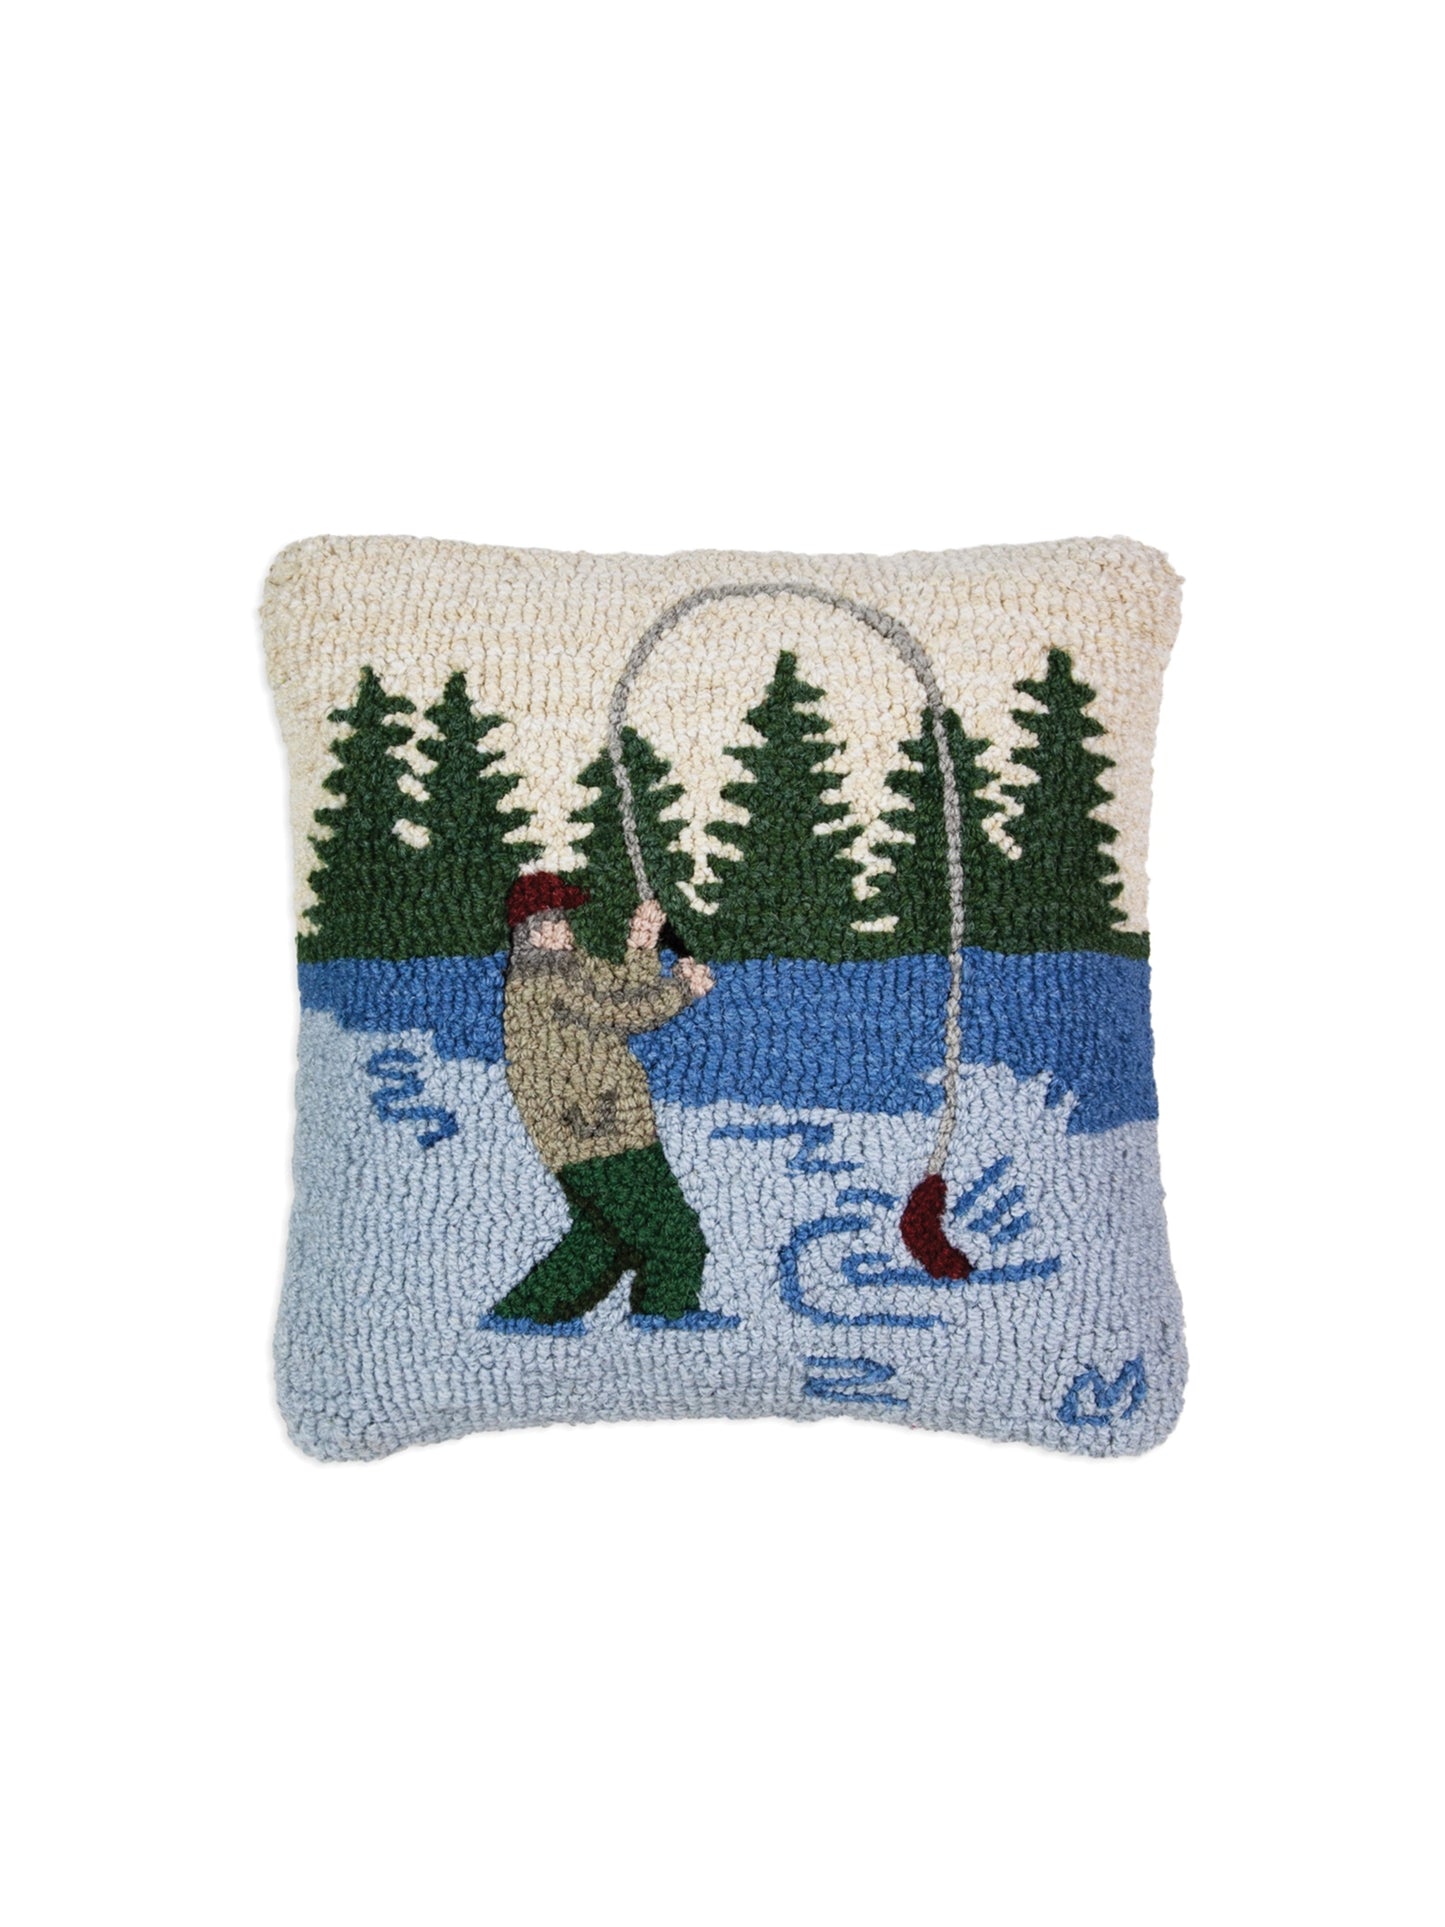 Fish Camp Hooked Wool Pillow Weston Table